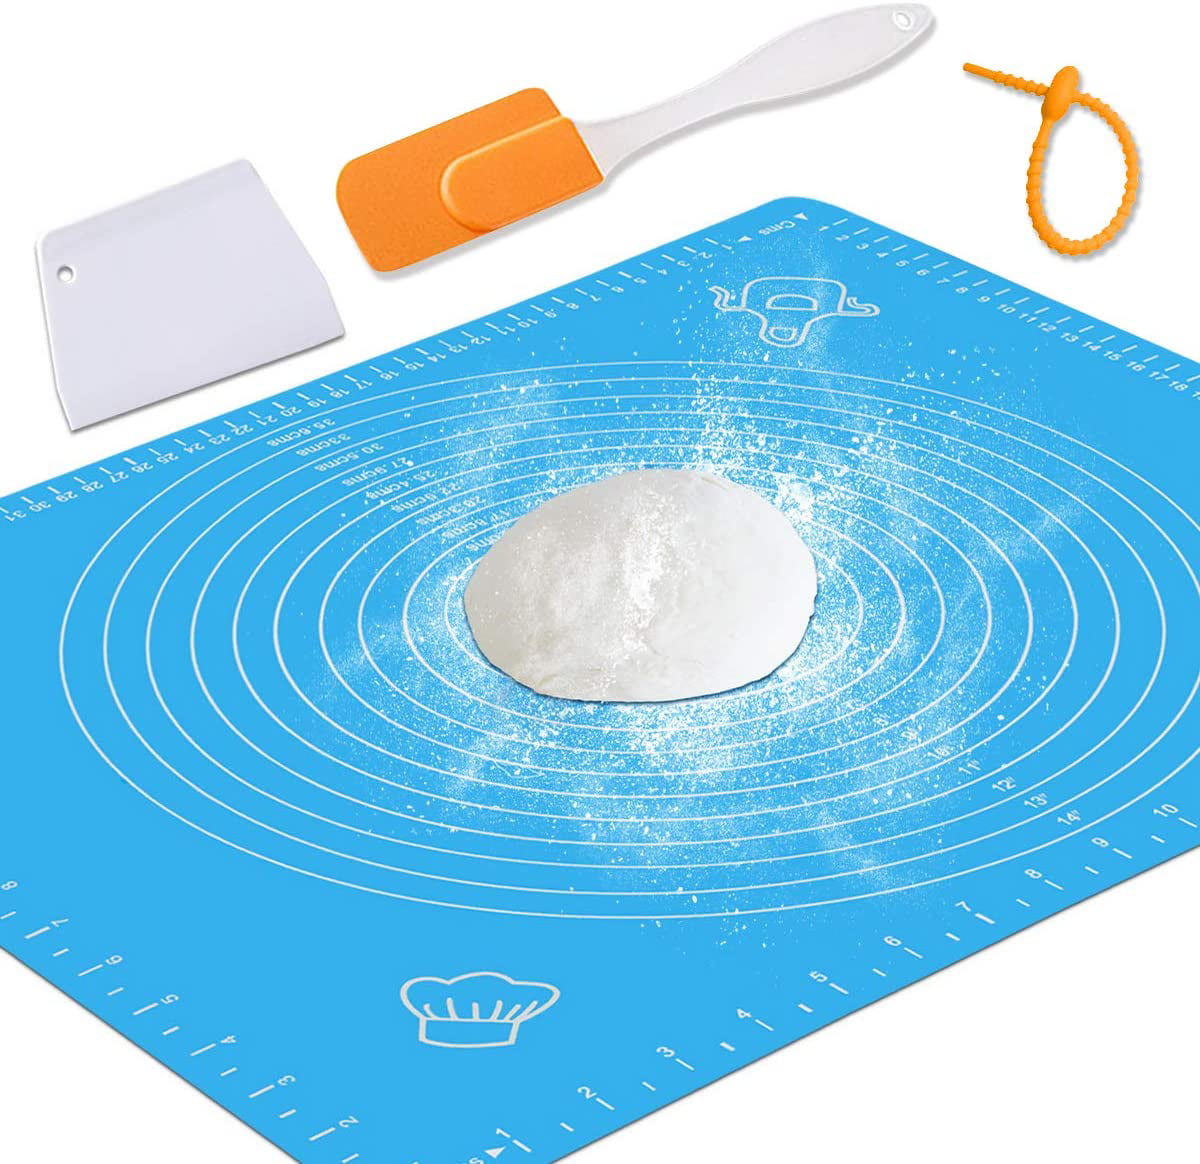 BianchiPatricia Non-Stick Silicone Baking Mat Pad Sheet Baking Pastry Tools Rolling 